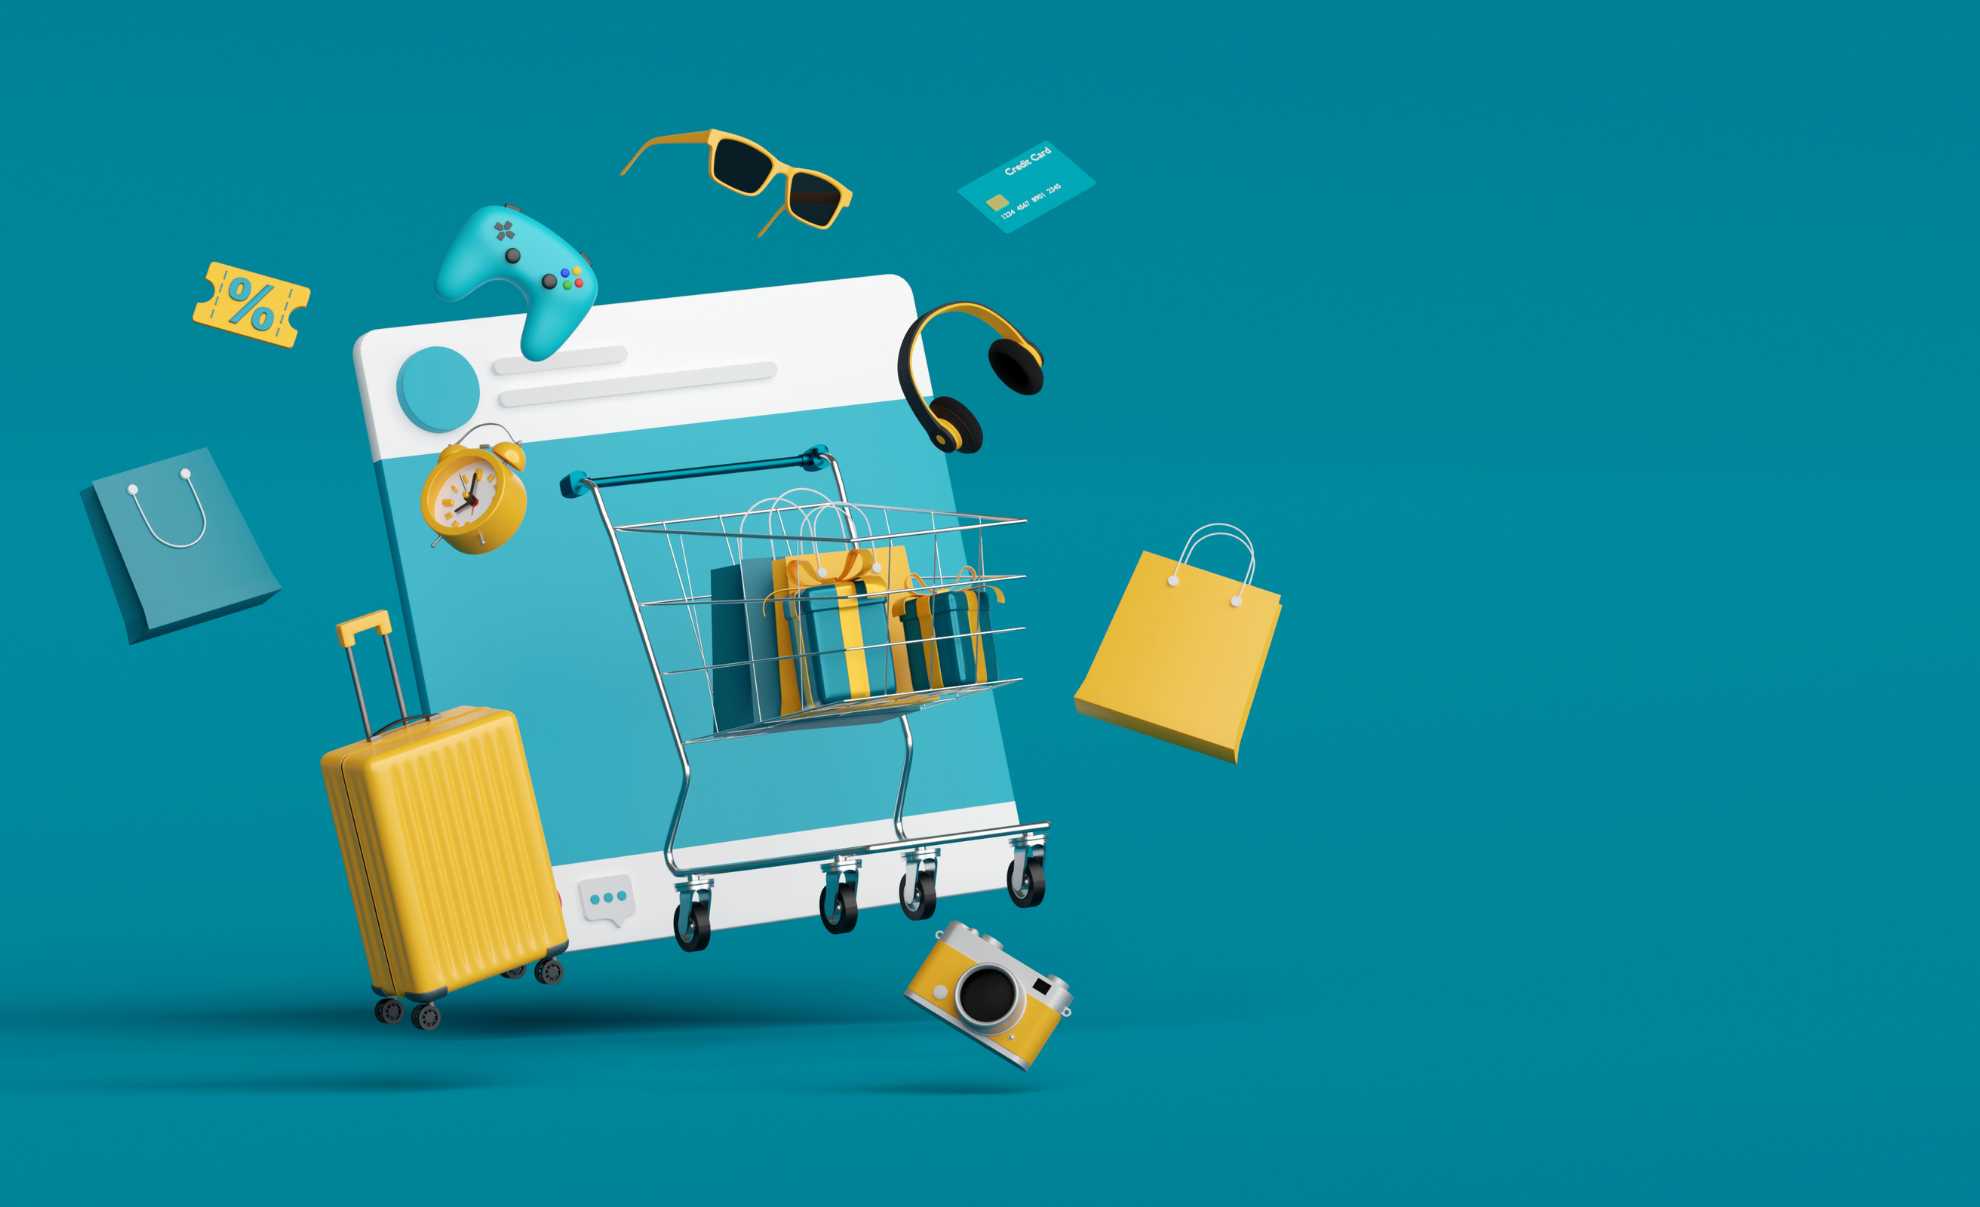 A website page with many items including wrapped presents, a suitcase, camera, sunglasses and headphones bursting from the page as many customers use alternative online payment options on the Ecommerce shop